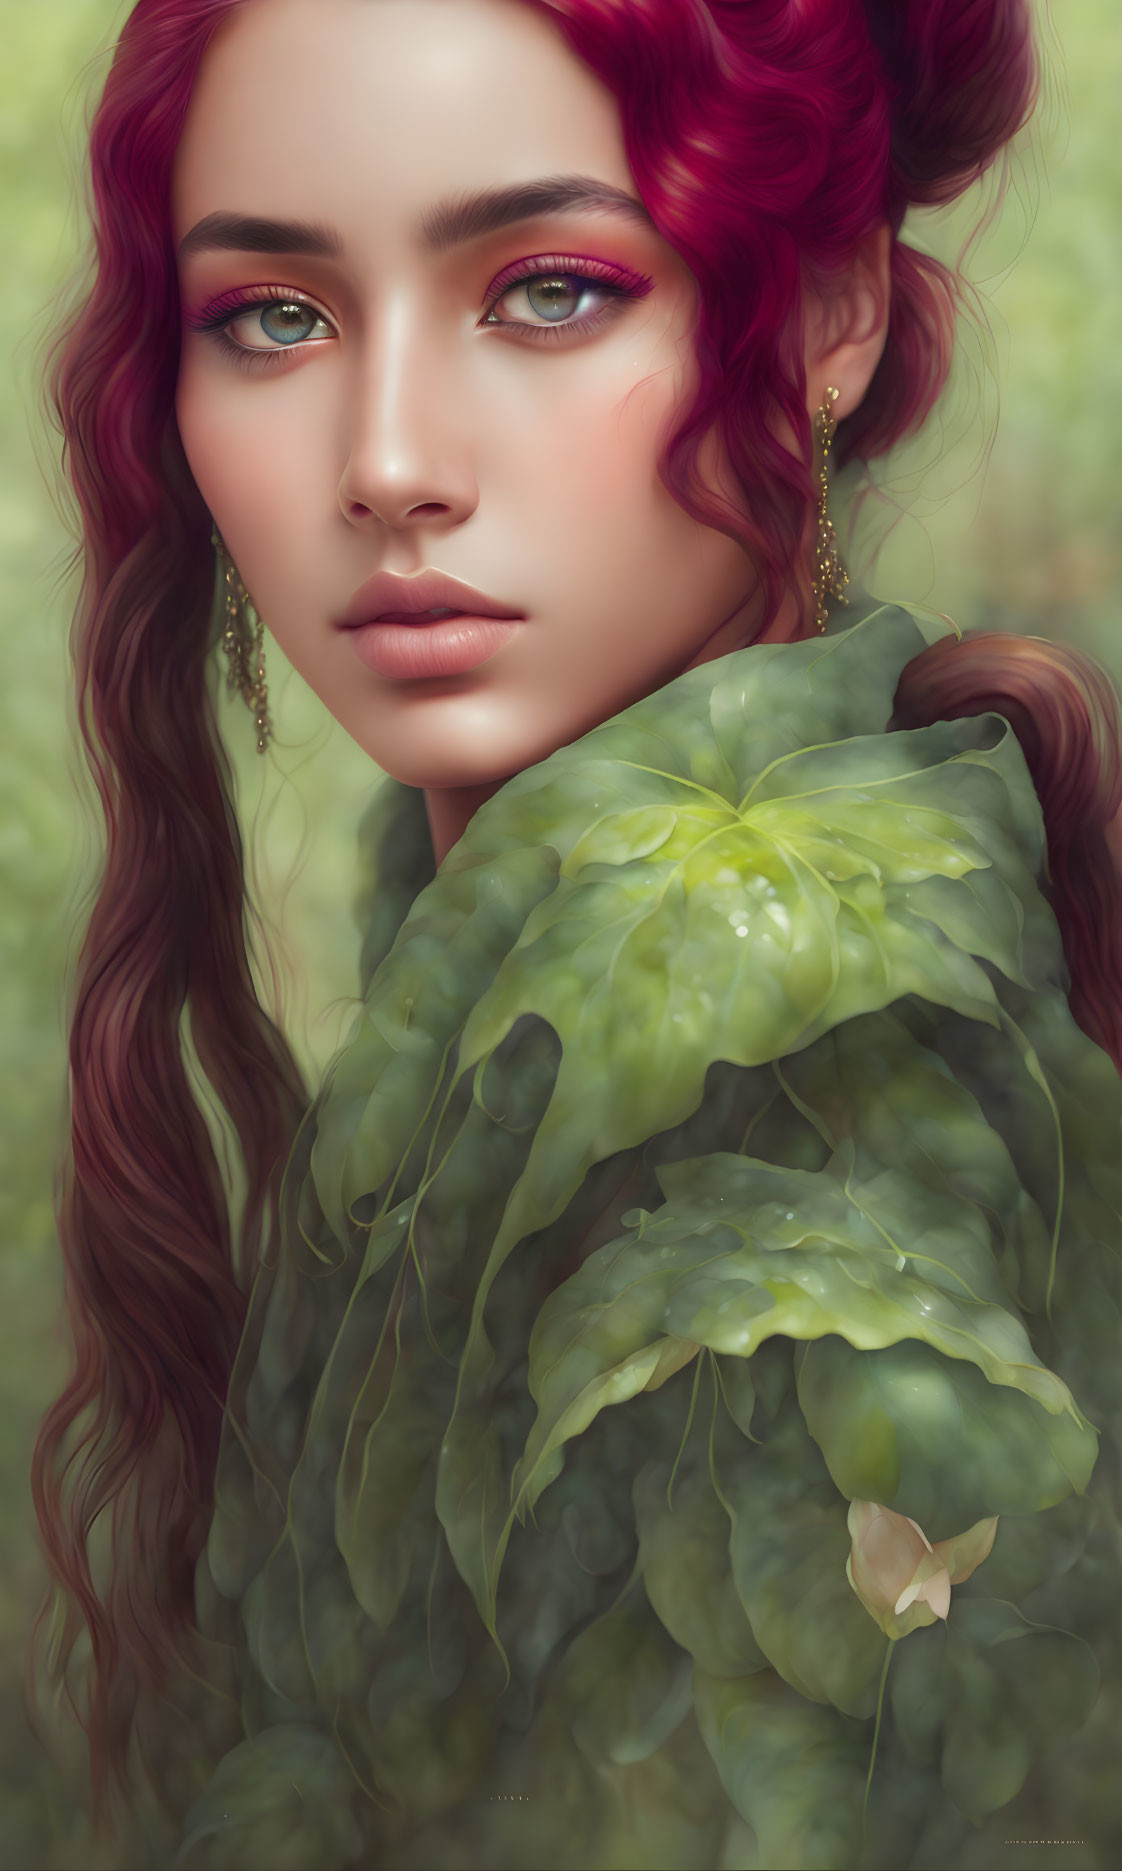 Vibrant red hair, green eyes, pink makeup: Woman portrait with gold earrings and leafy